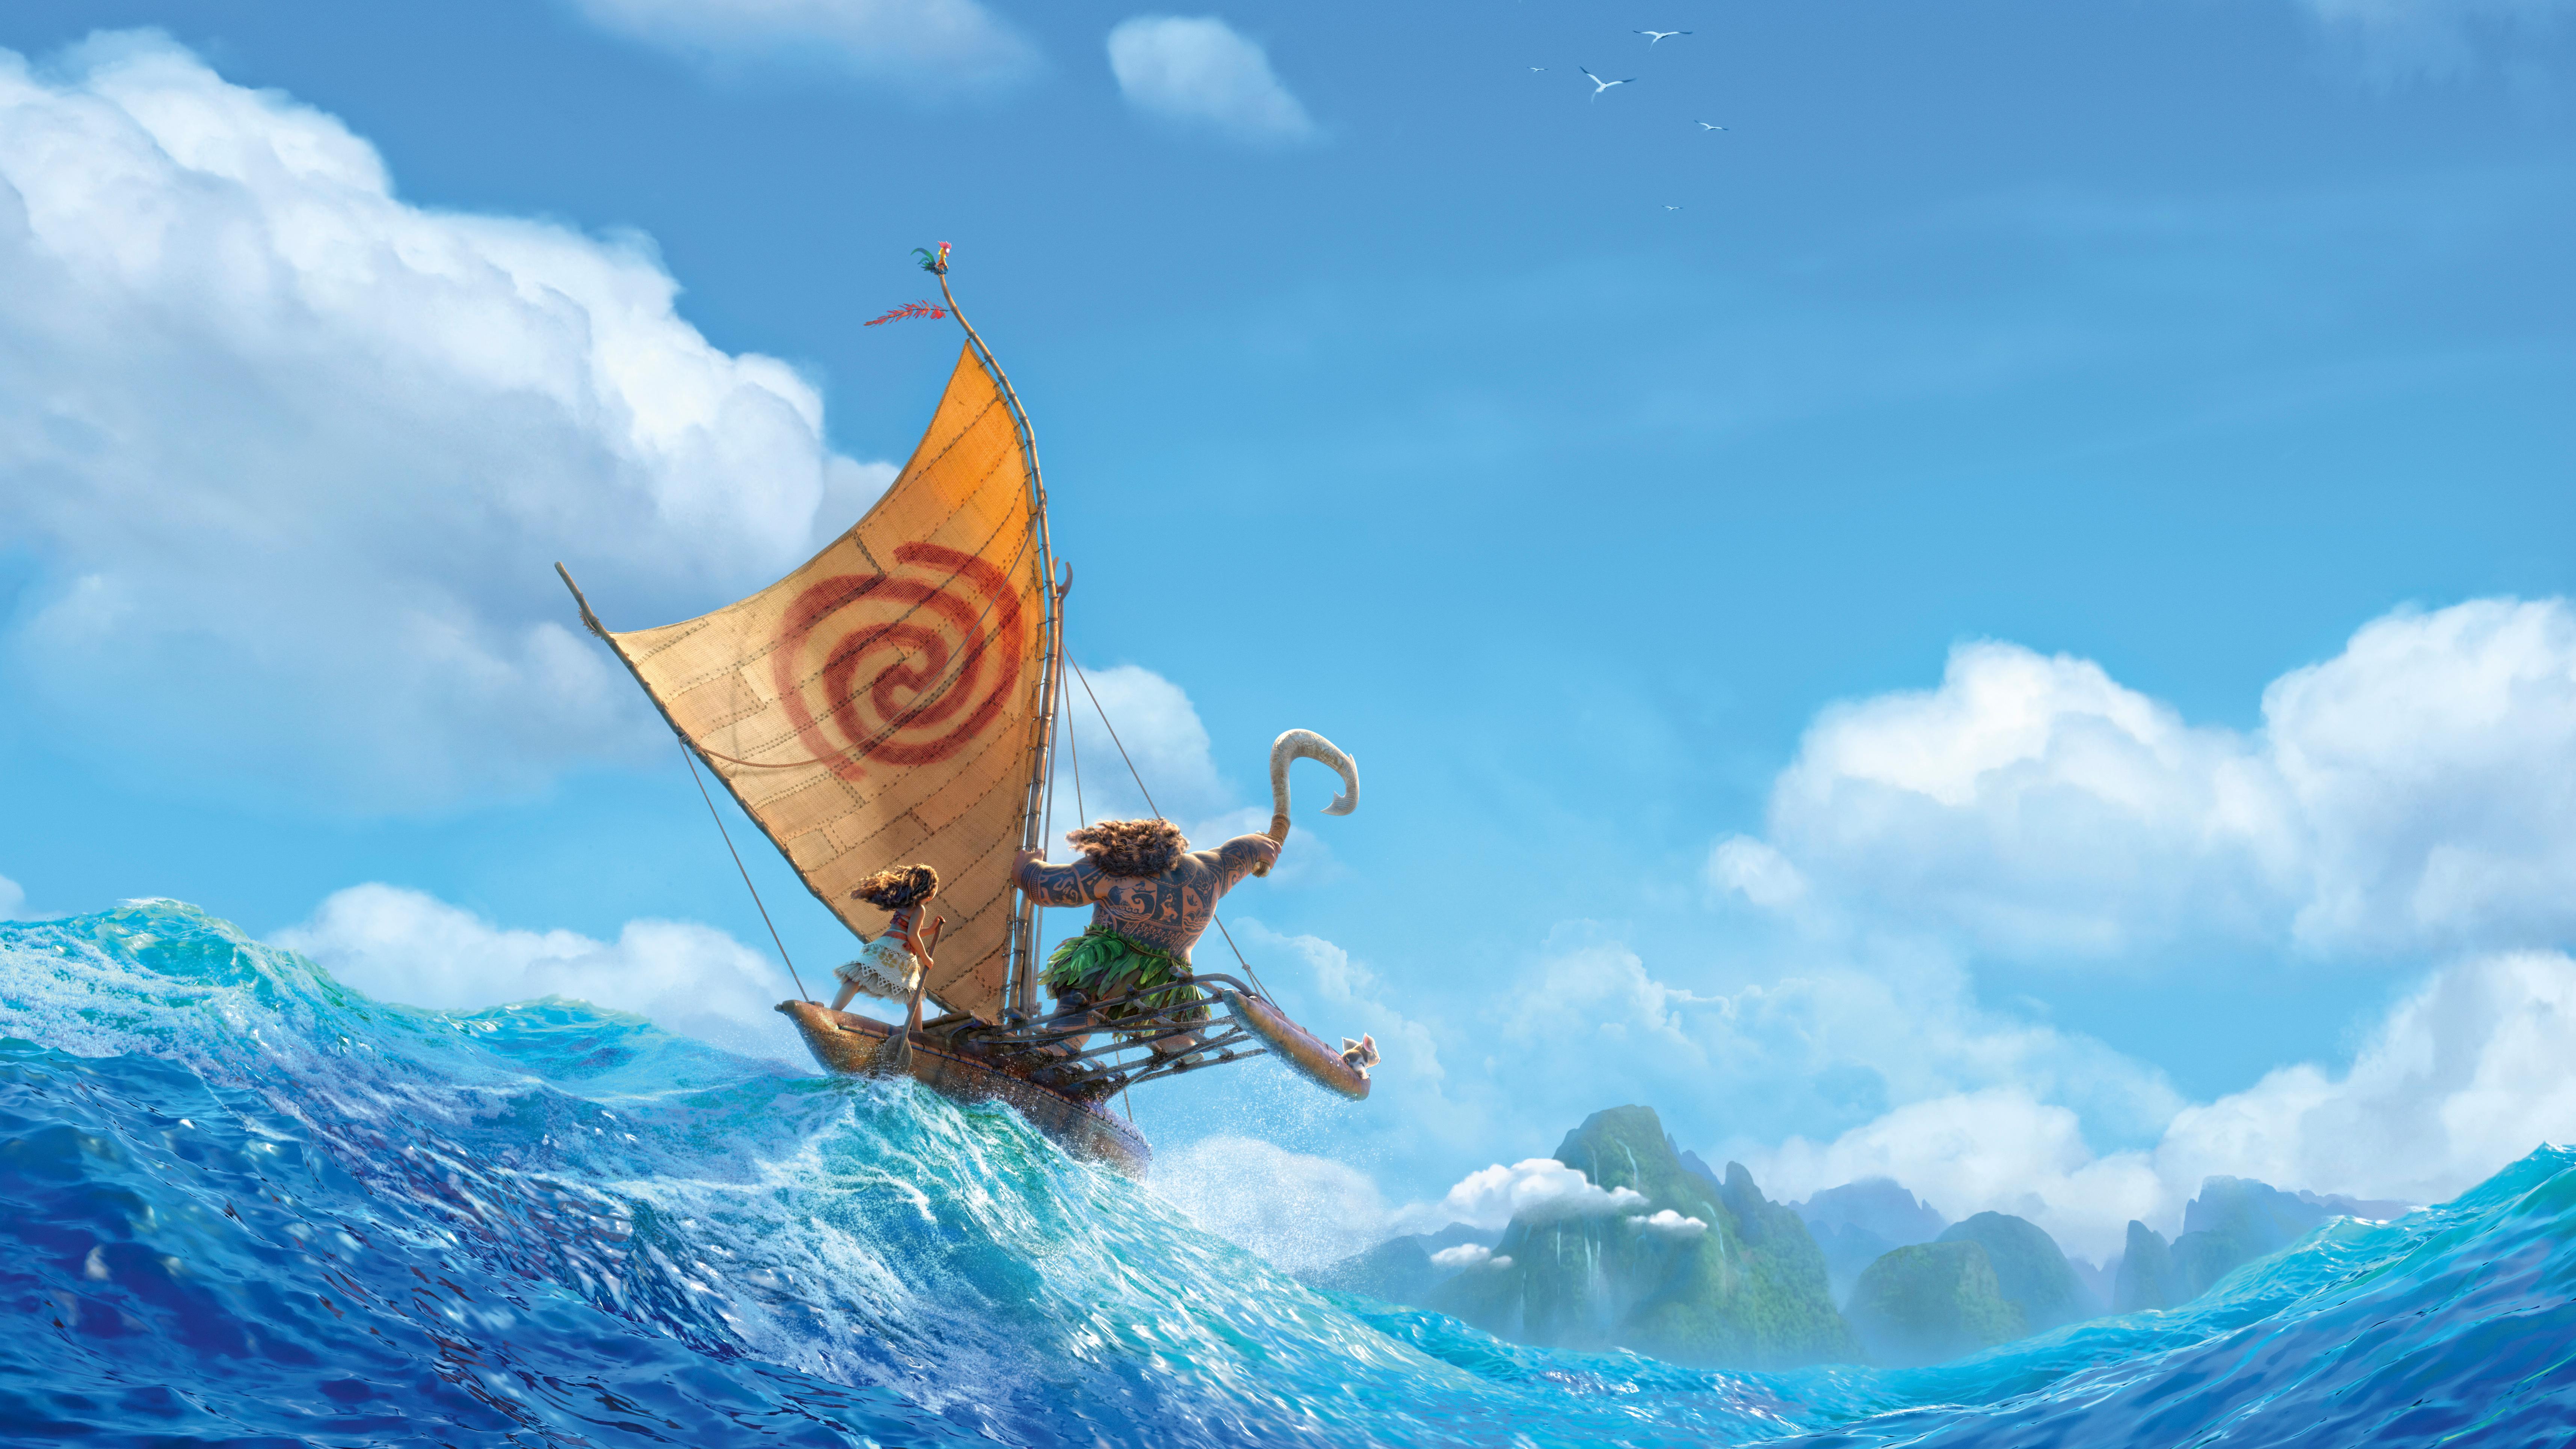  Moana HD Wallpapers and Backgrounds